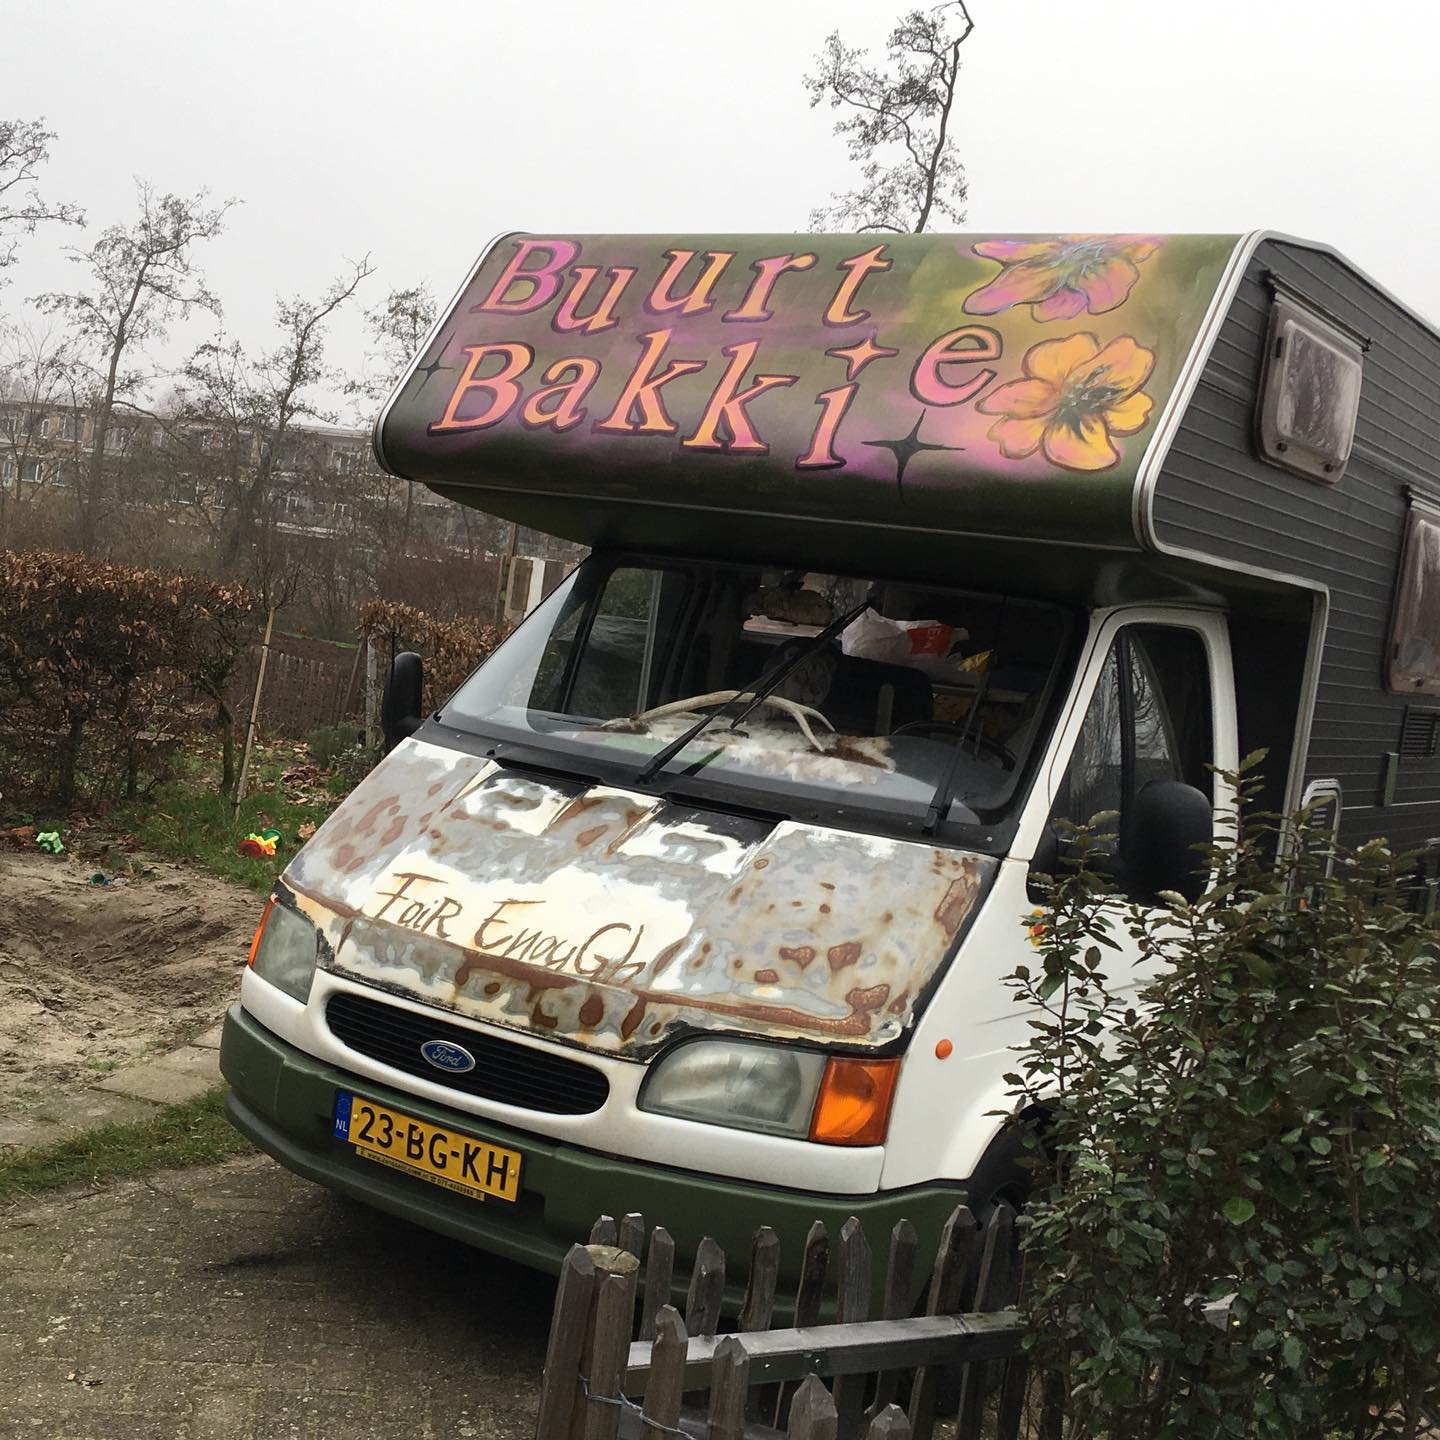 Today I painted the BuurtBakkie camper van for Gemeente Den Haag’s Community Builder Saskia de Vin. It was a really cold, but lovely day at Toverbosch! You can find Saskia and the van the coming months at several locations in Haagse Hout. Drop by for a ‘BuurtBakkie’!.@saskia.devin #buurtbakkie #campervan #molotow #haagsehout #toverbosch @inhettoverbosch